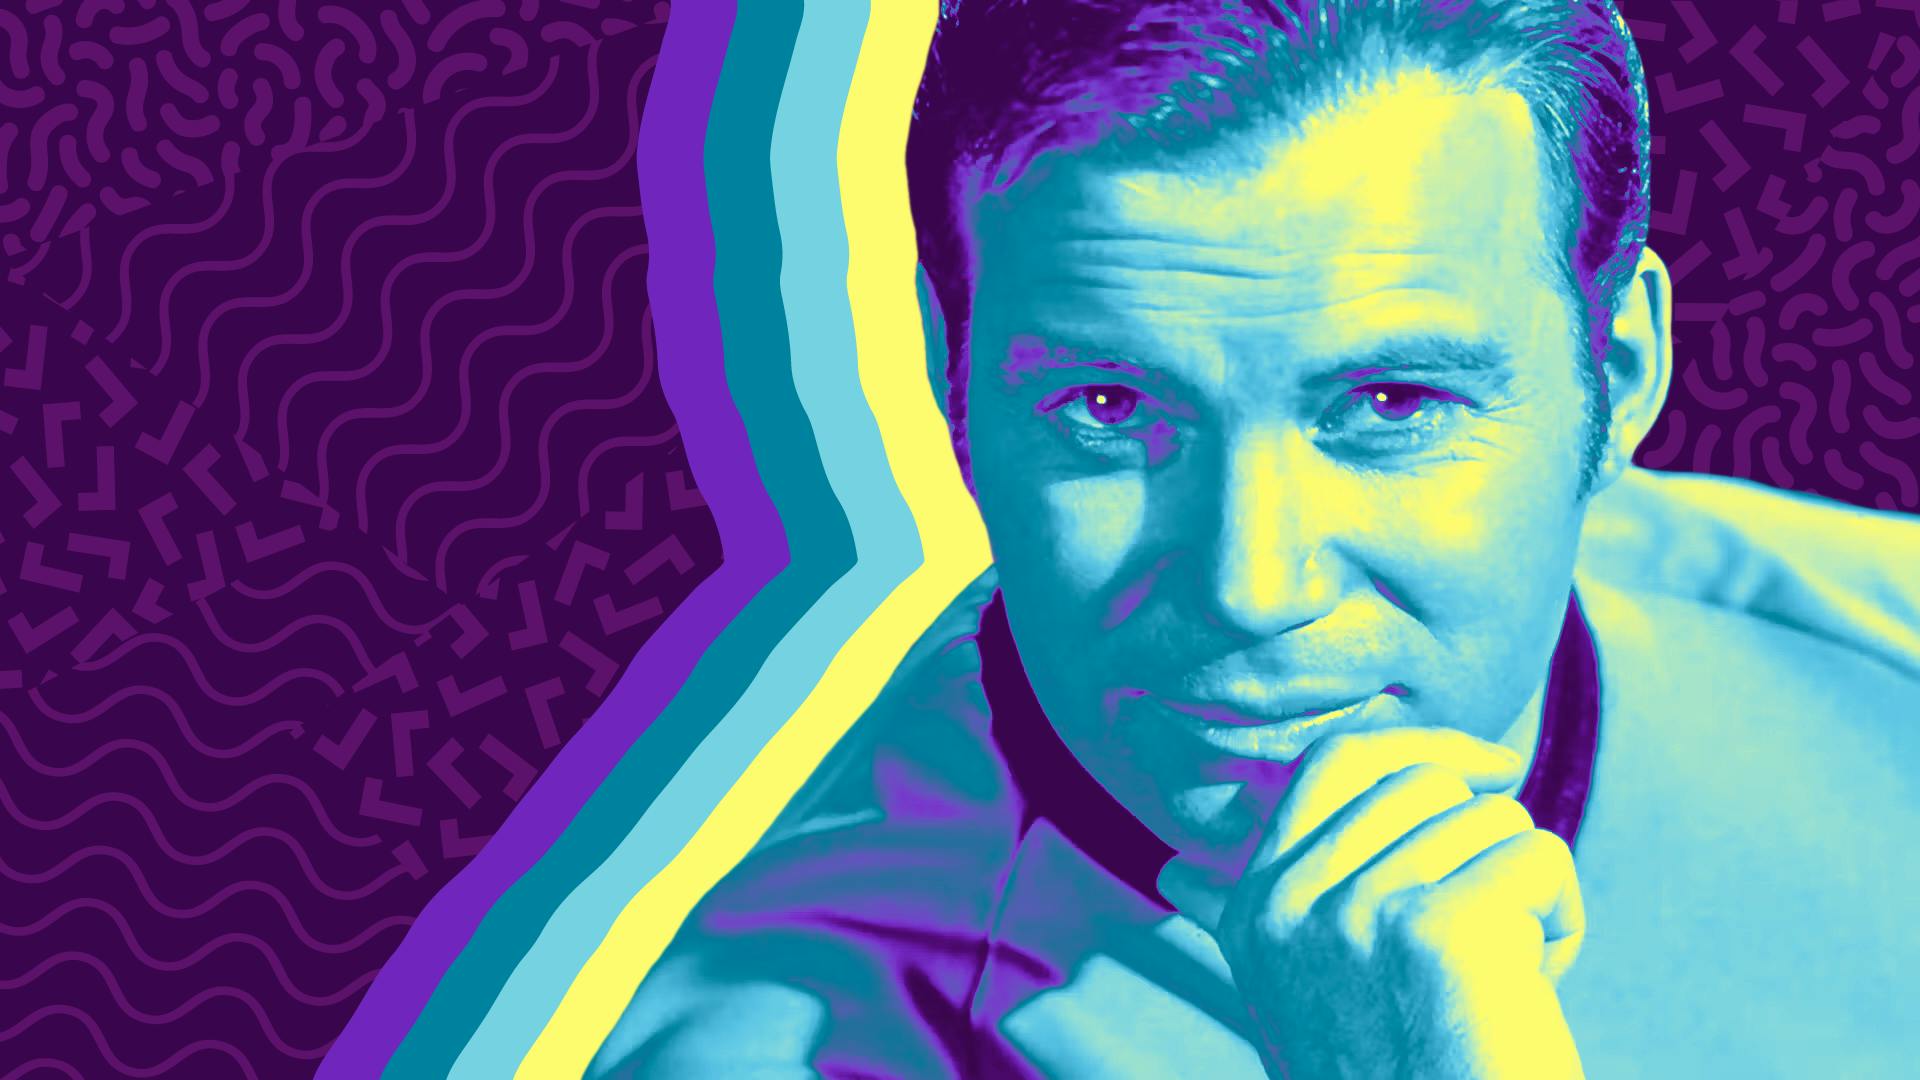 Stylized image of James T. Kirk